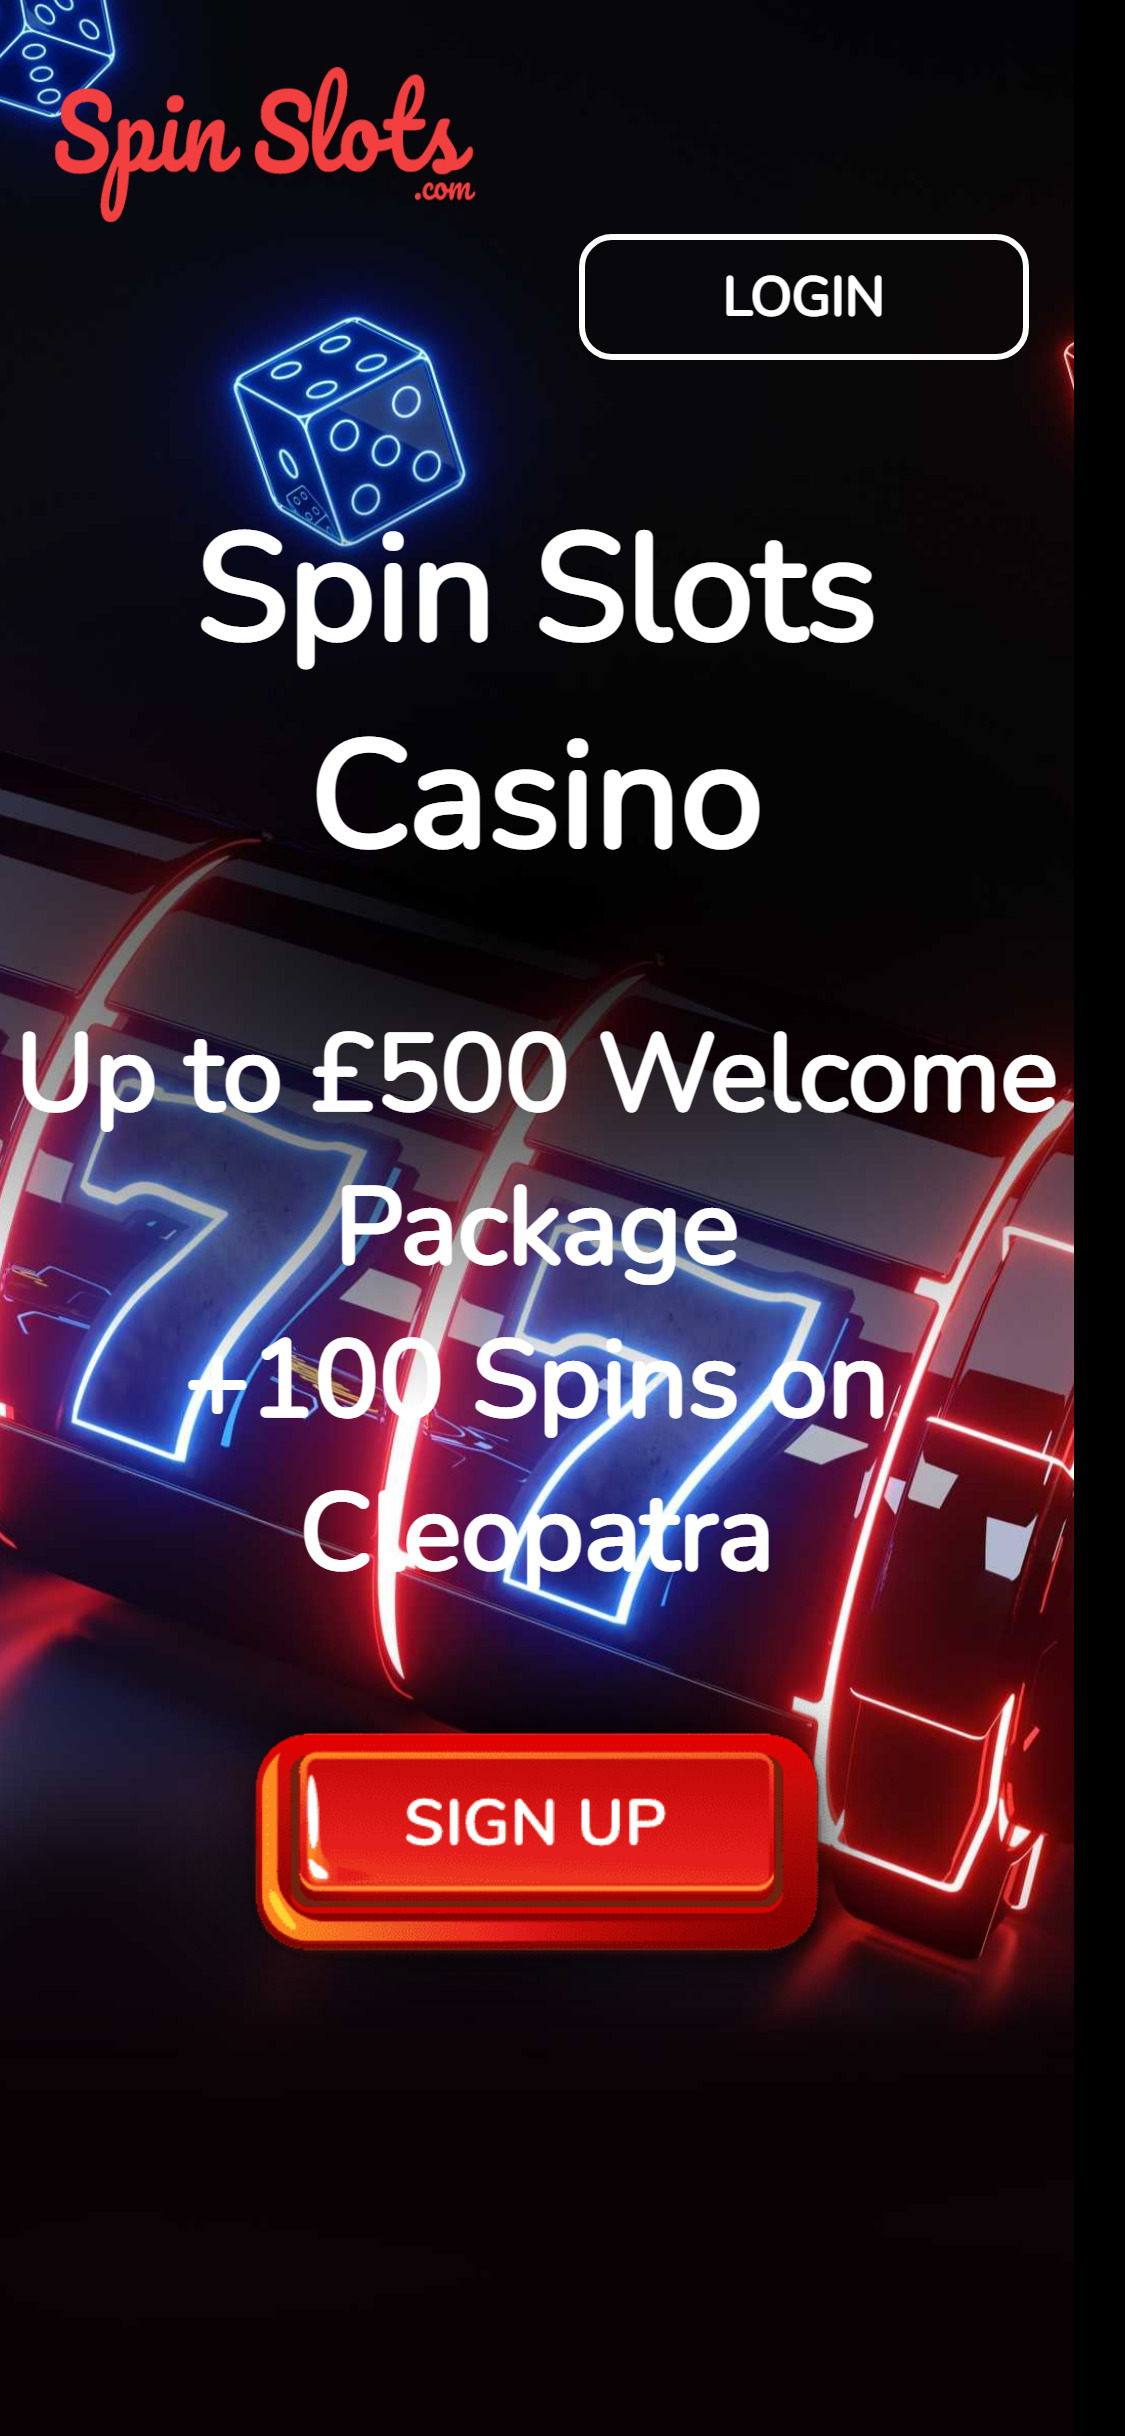 Spin Slots Casino Mobile Review